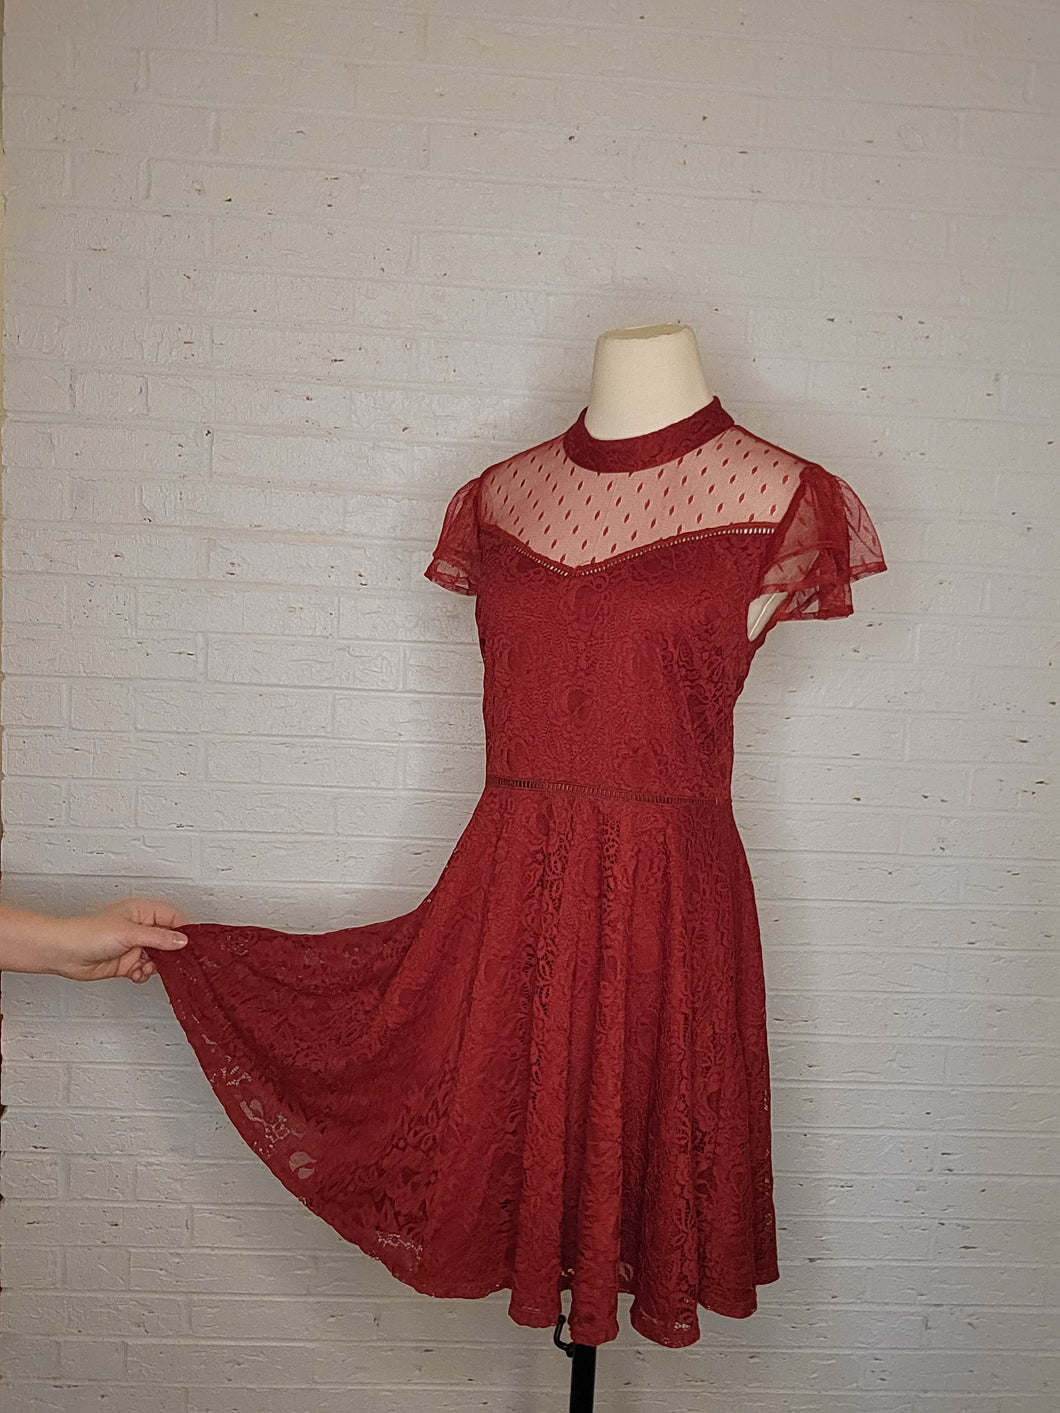 M - NWT Red Lace Dress